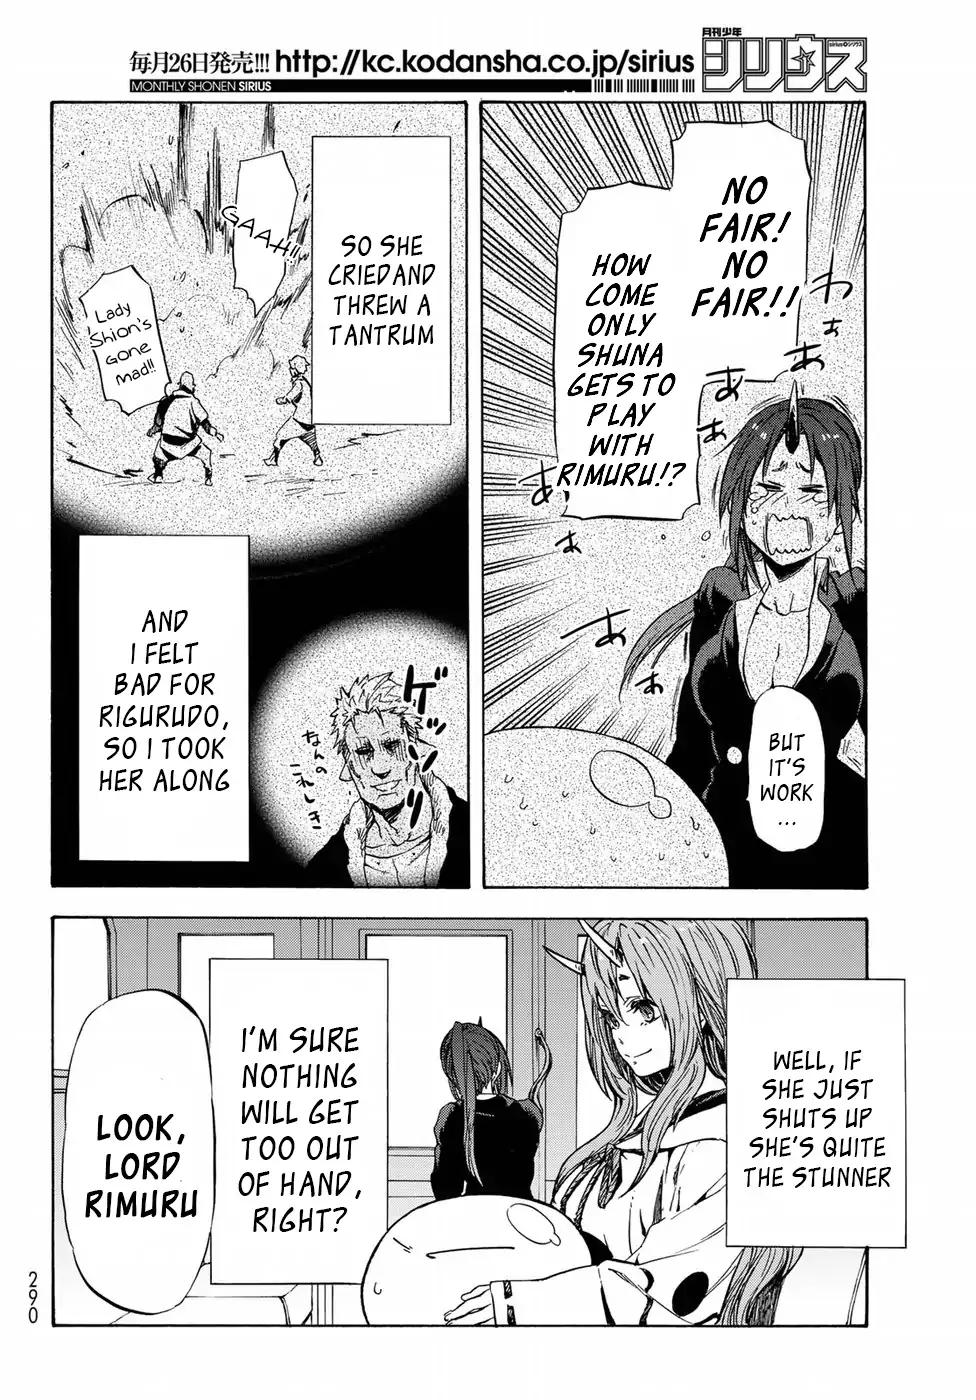 That Time I Got Reincarnated as a Slime, Chapter 41